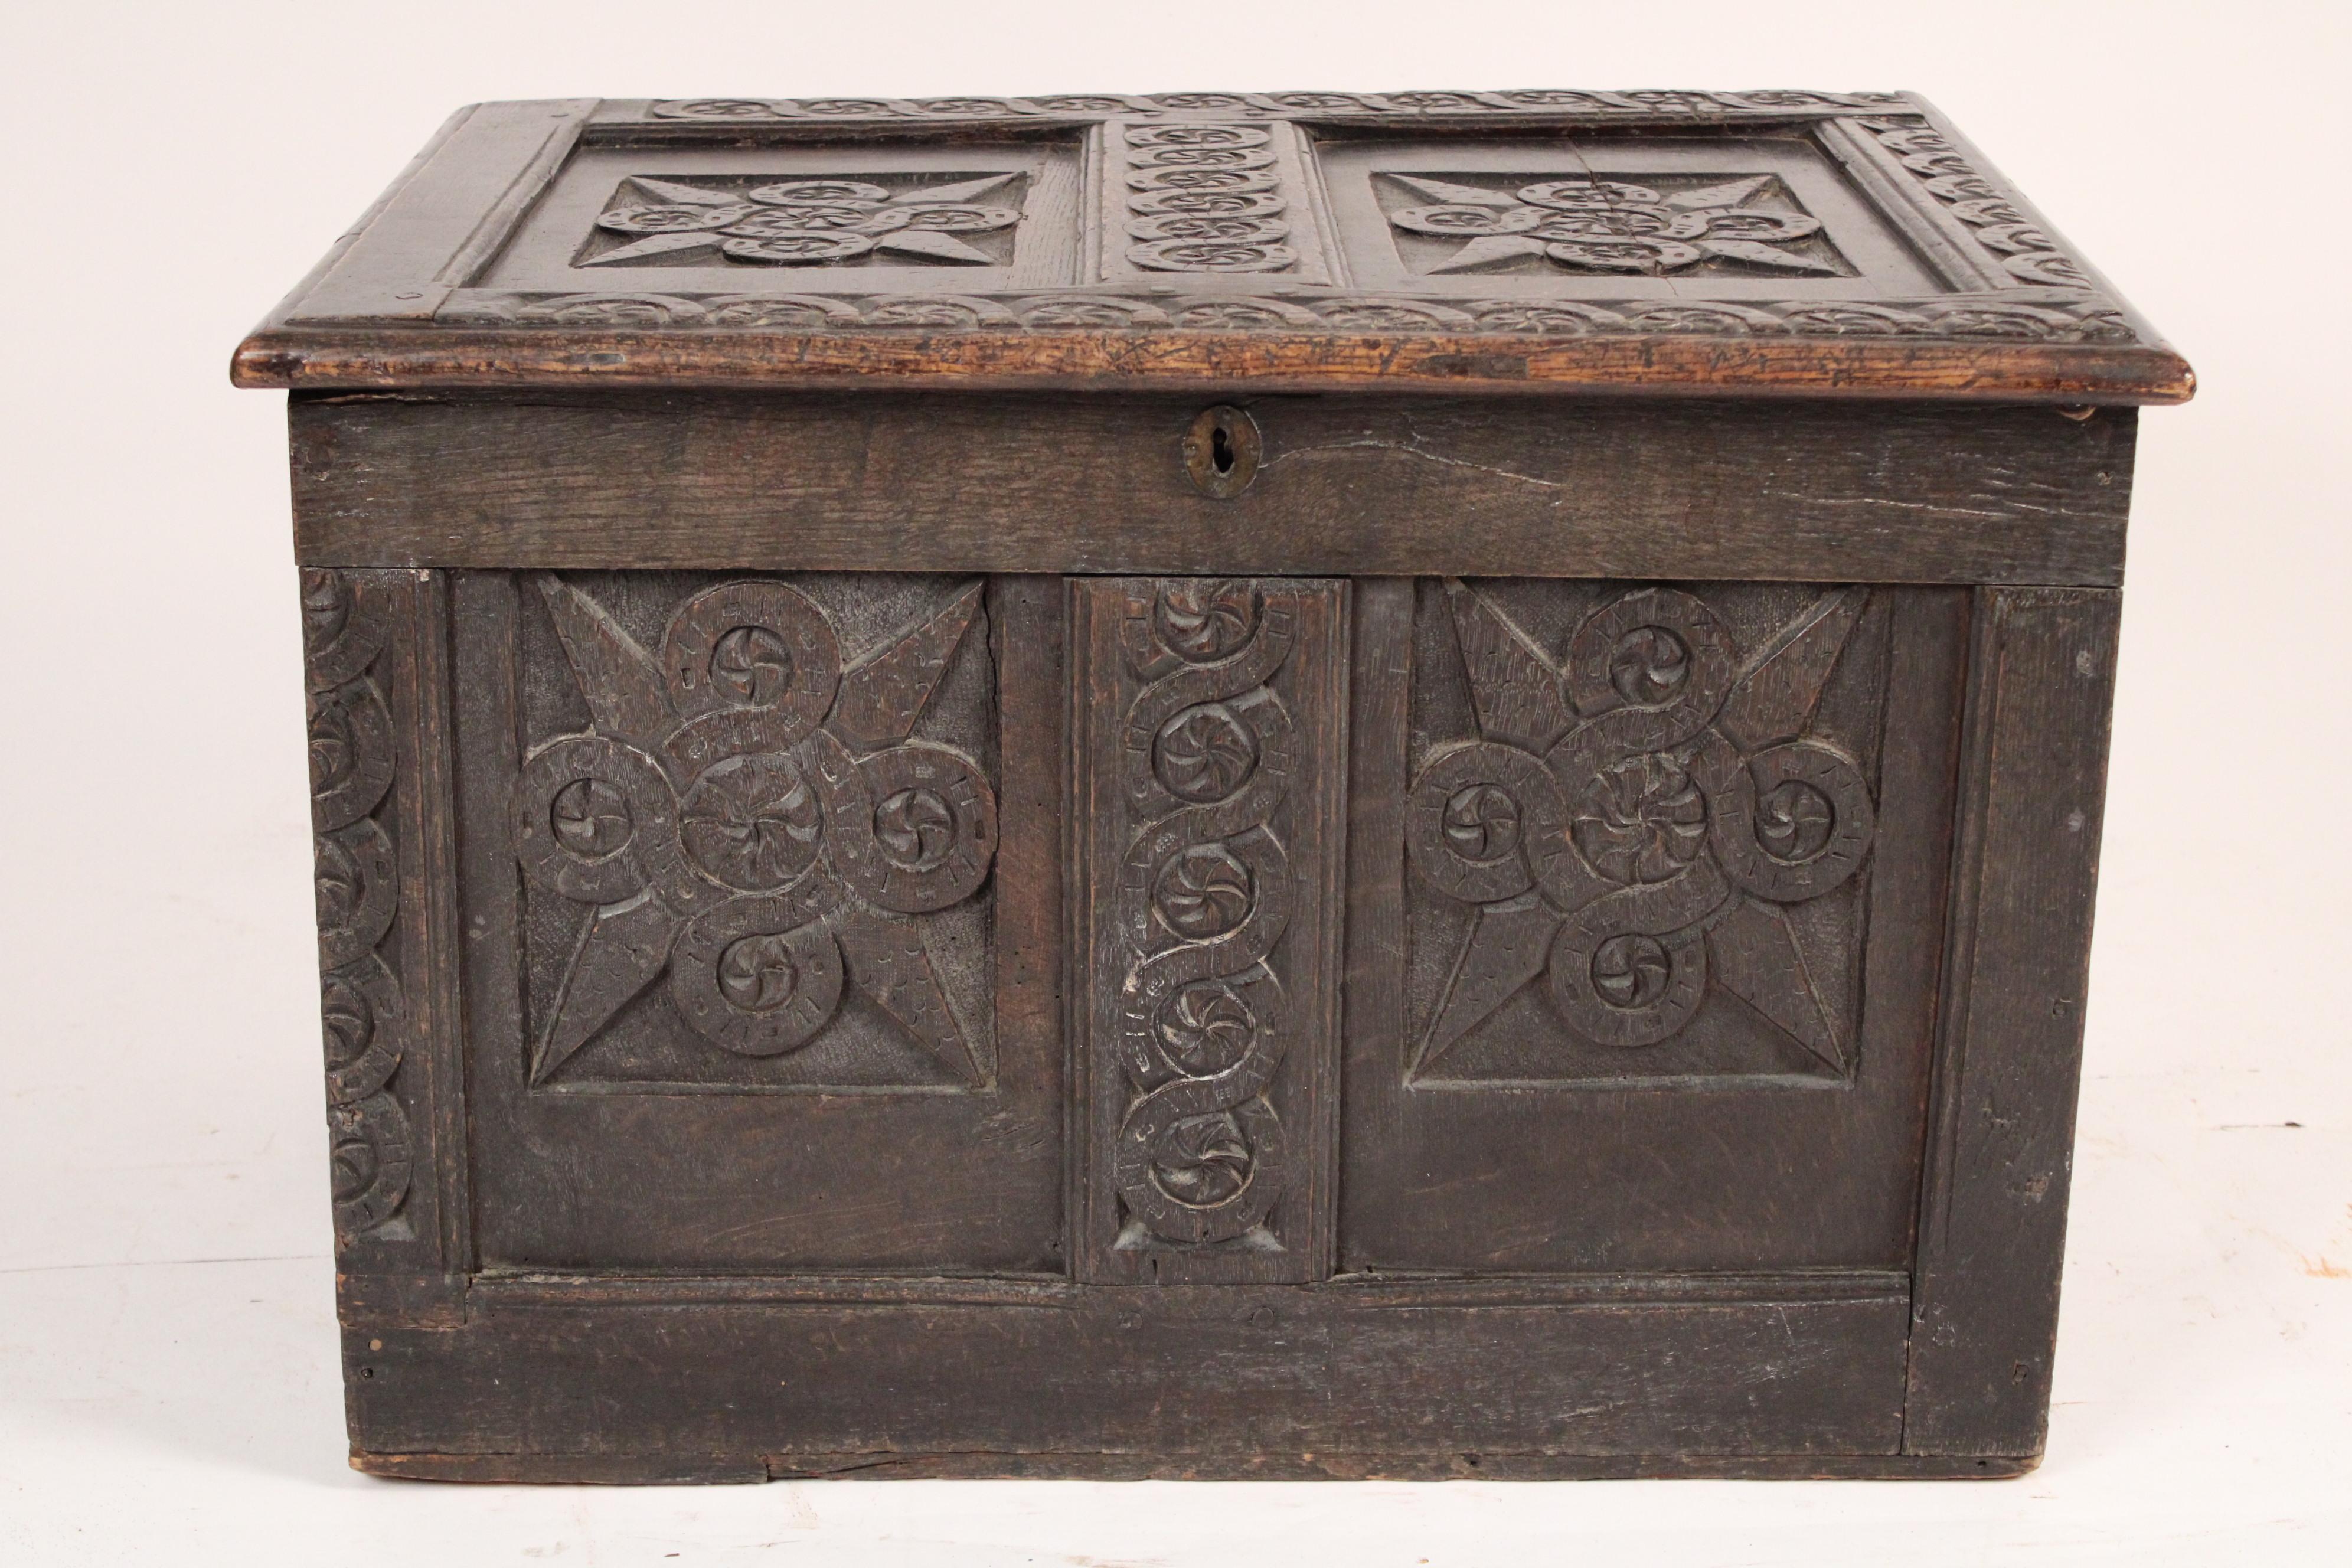 Tudor style carved oak trunk, made of 18th century and later elements. Most likely assembled circa 1920's.